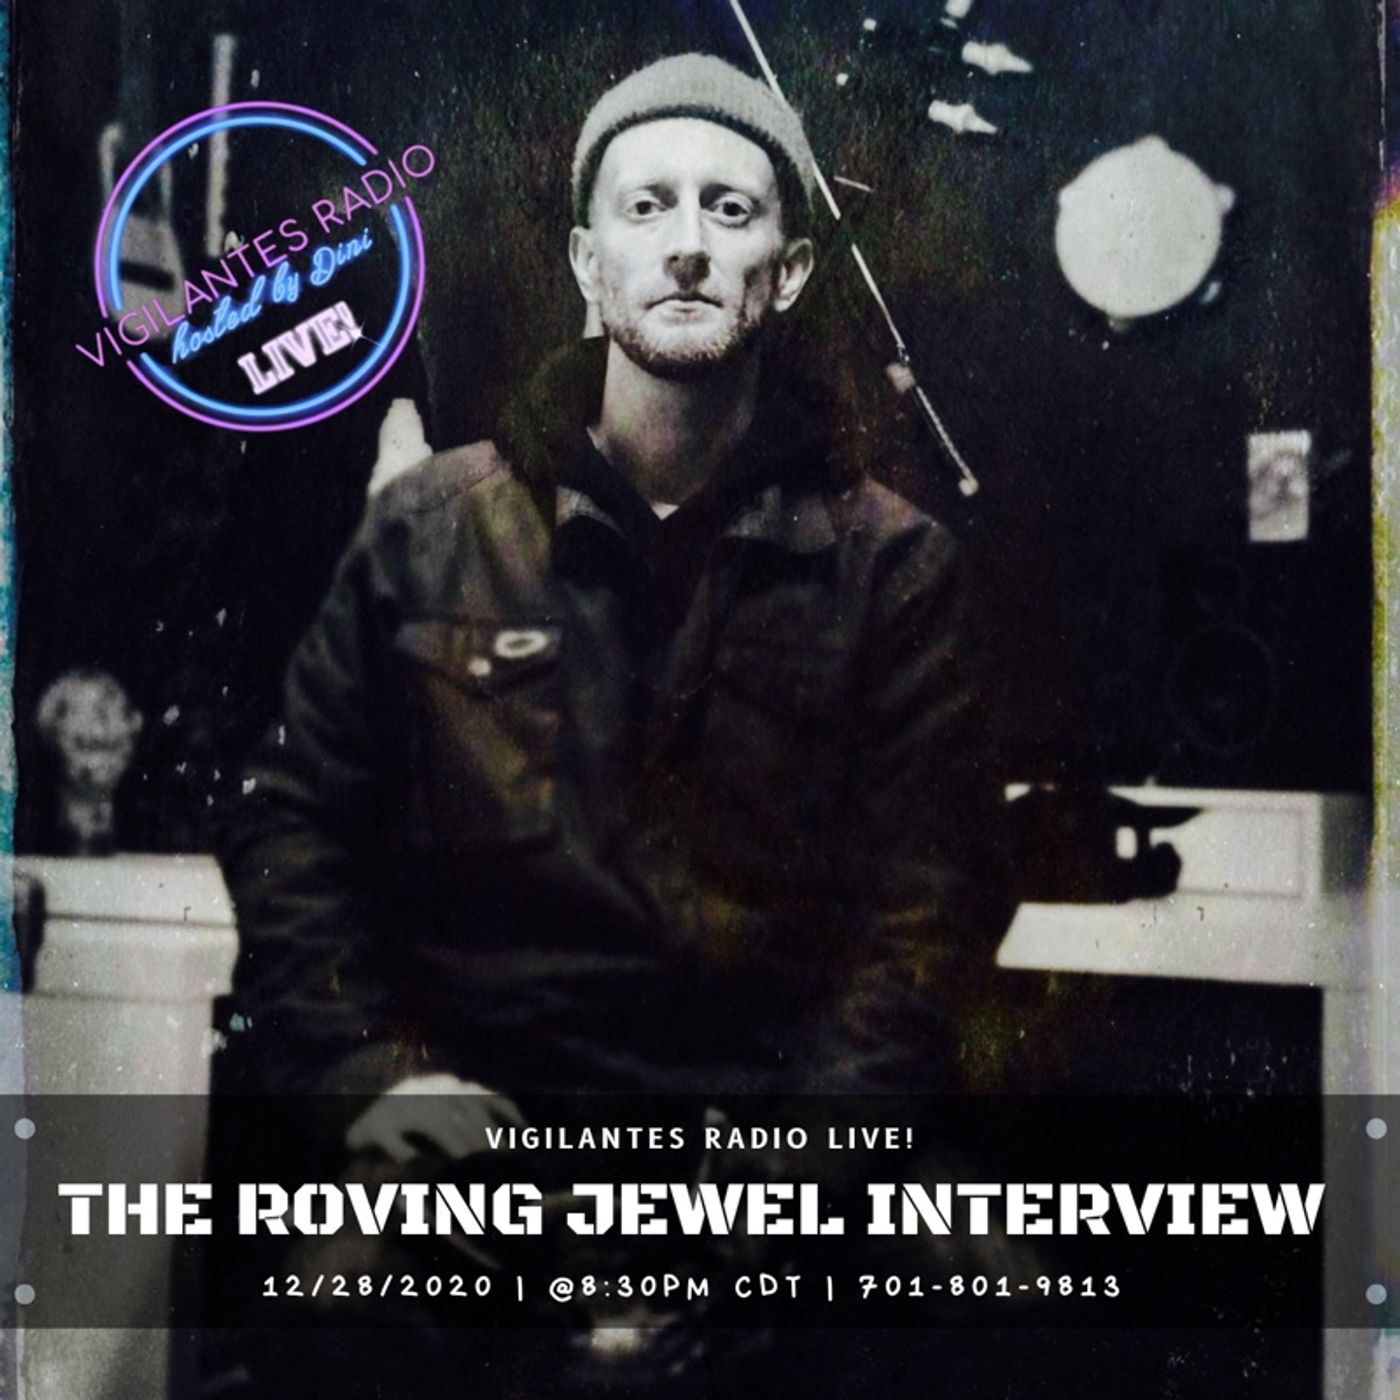 The Roving Jewel Interview. Image